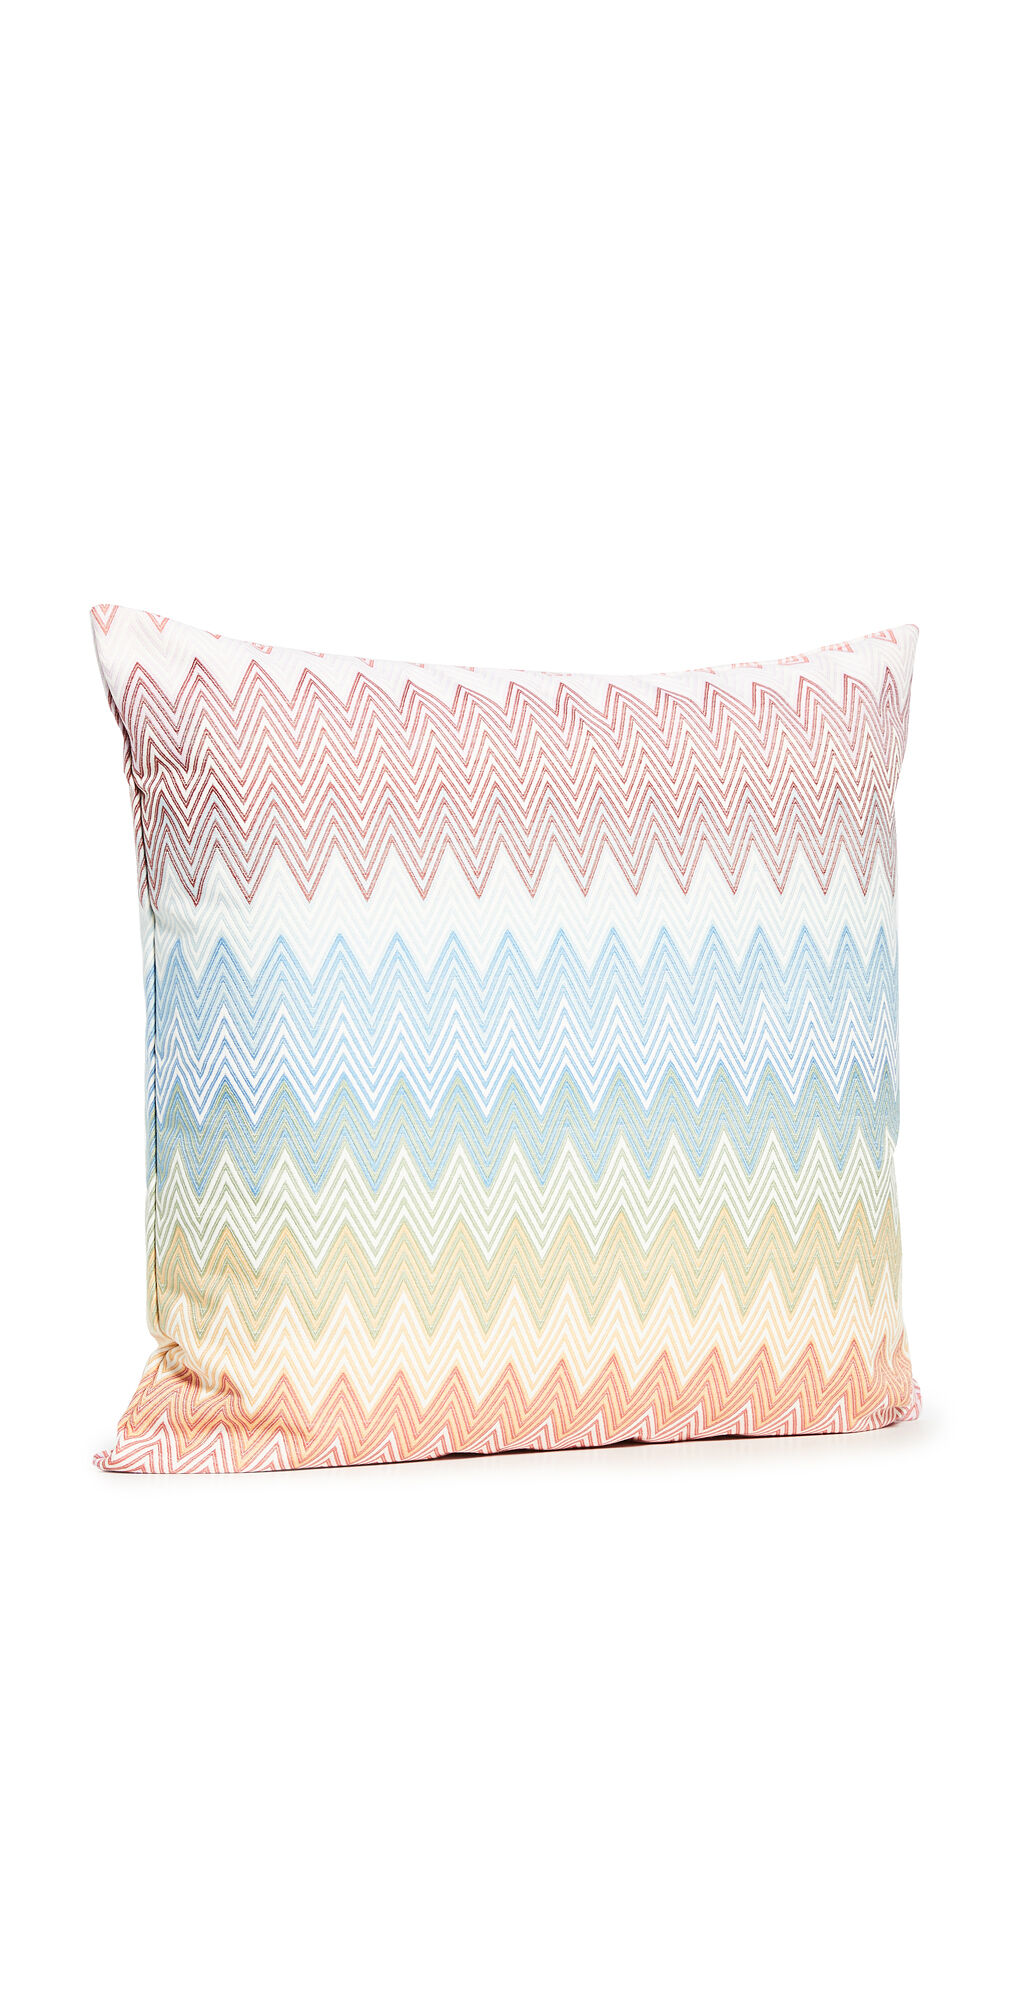 Missoni Home Weymouth Cushion Multicolor One Size  Multicolor  size:One Size